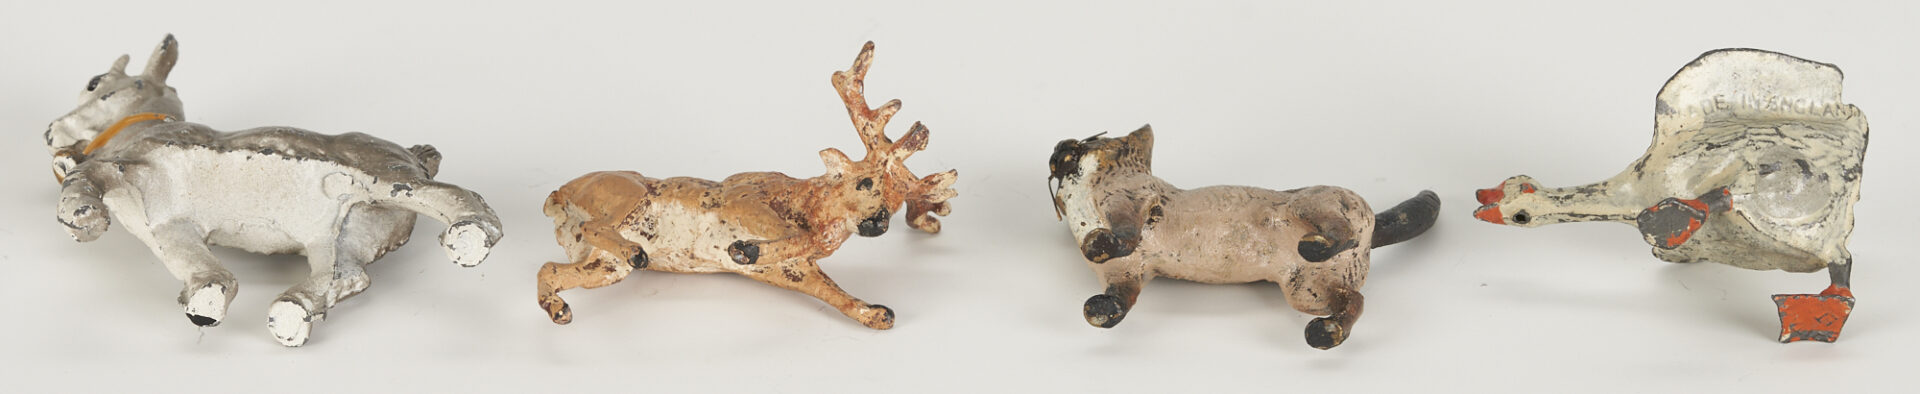 Lot 797: 8 Cold Painted Bronze Animal Sculptures, incl. Style of Franz Bergmann